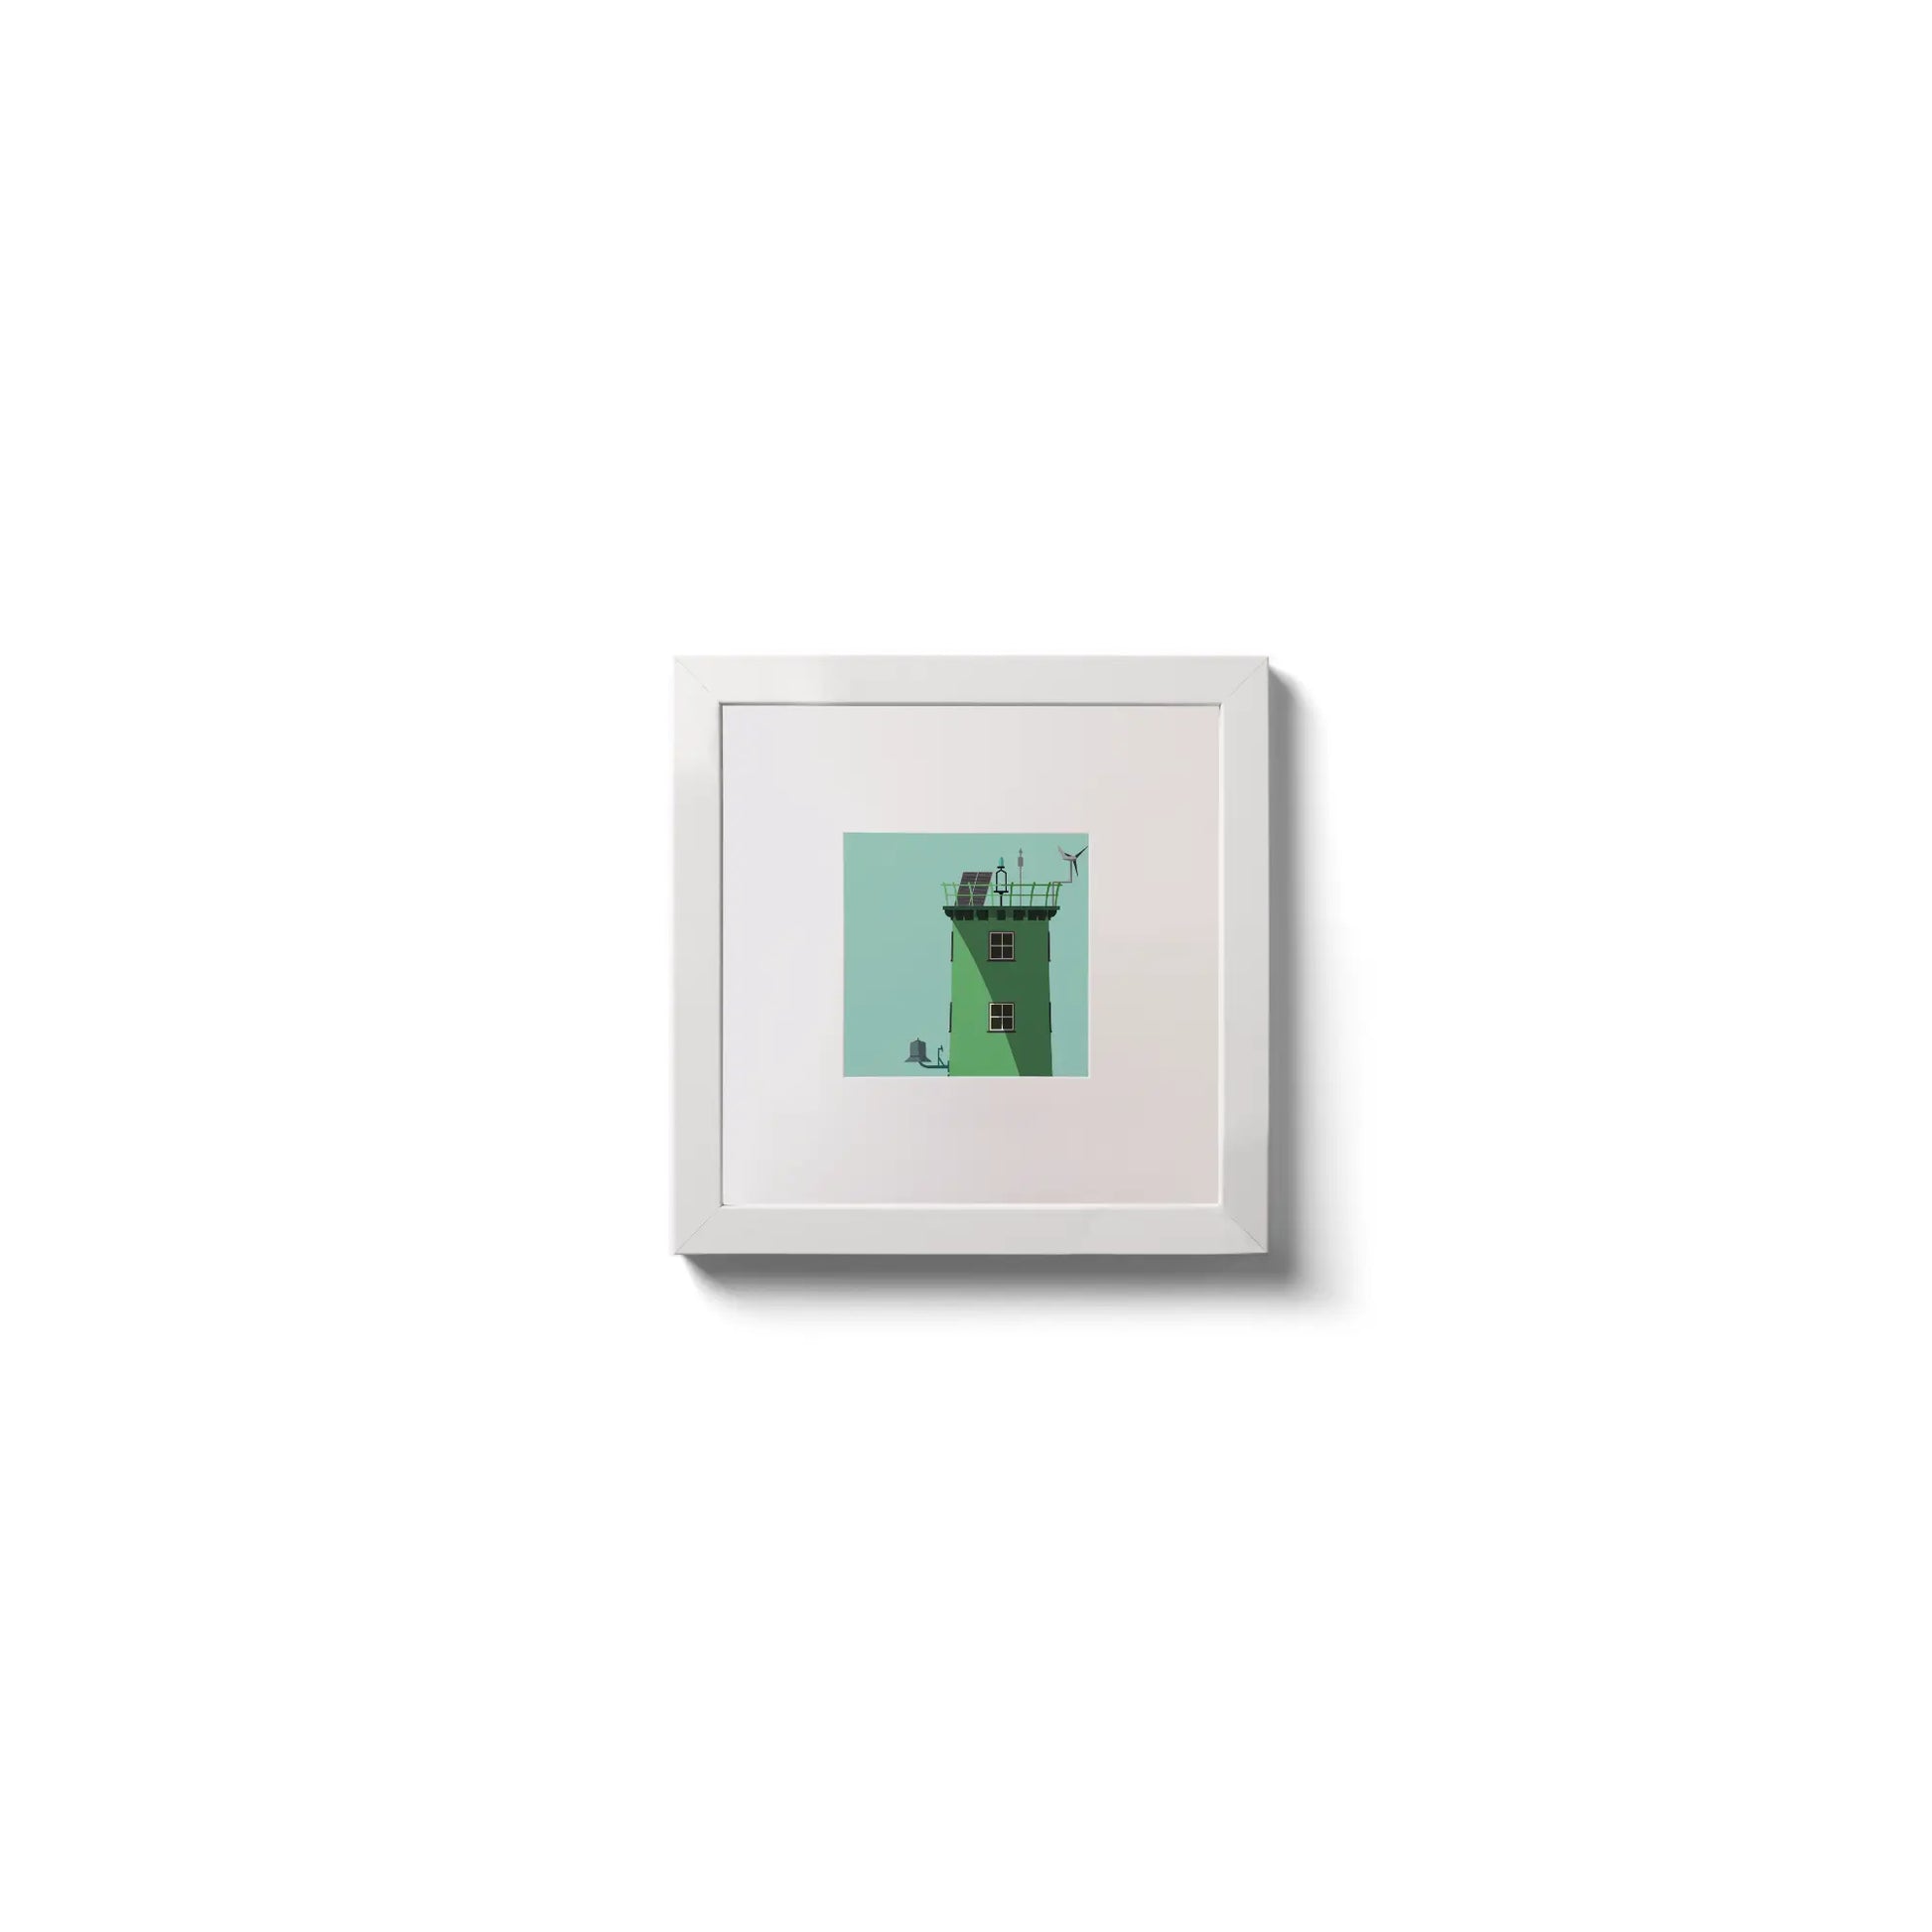 Illustration of North Bull lighthouse on an ocean green background,  in a white square frame measuring 10x10cm.